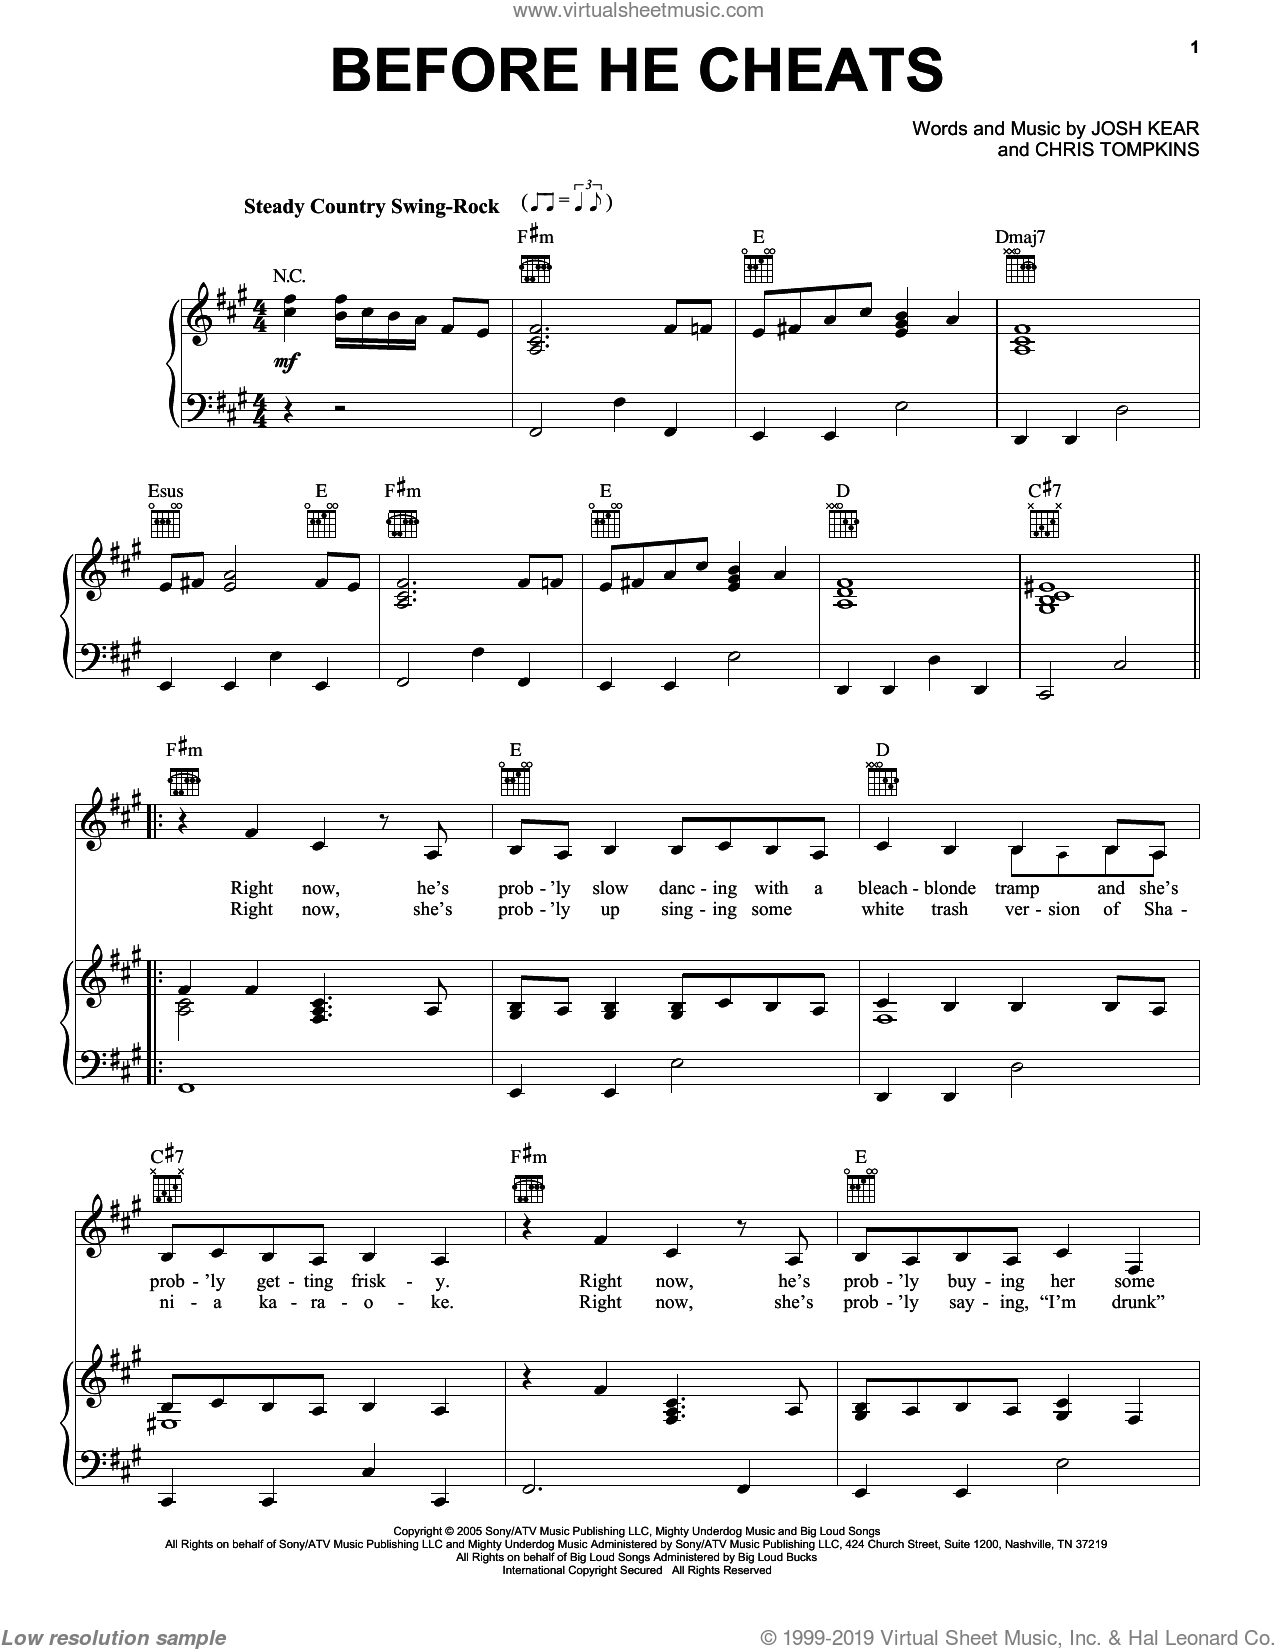 Before He Cheats sheet music for voice, piano or guitar (PDF)